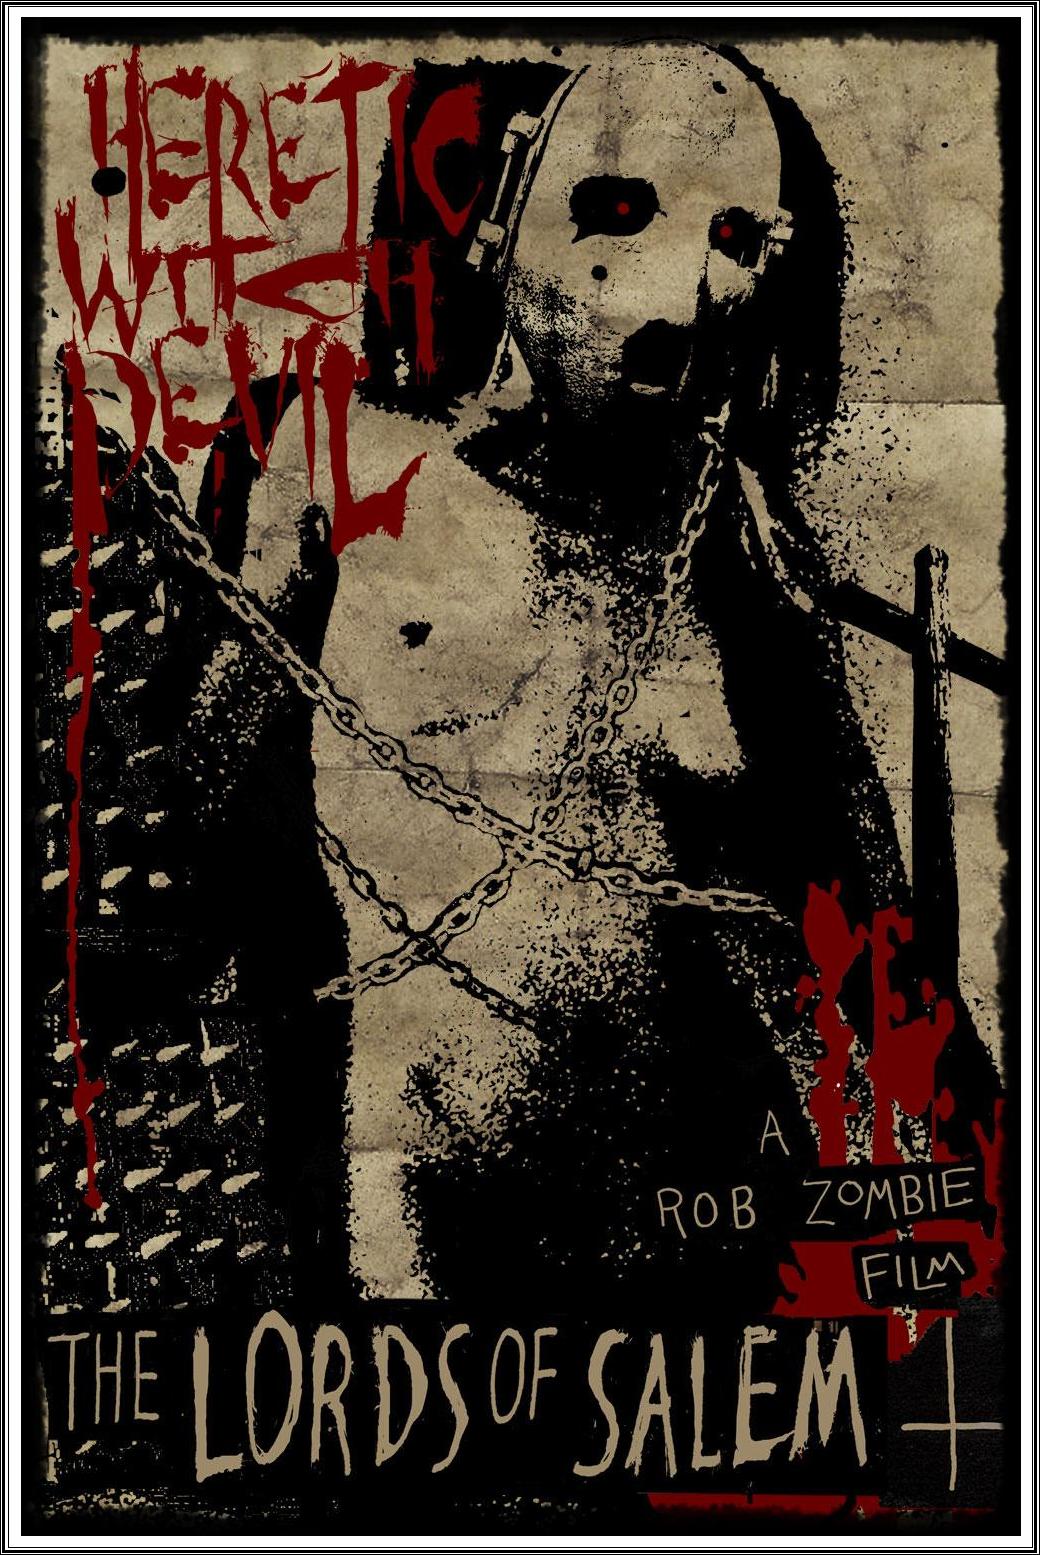 Rob Zombie's Lords of Salem